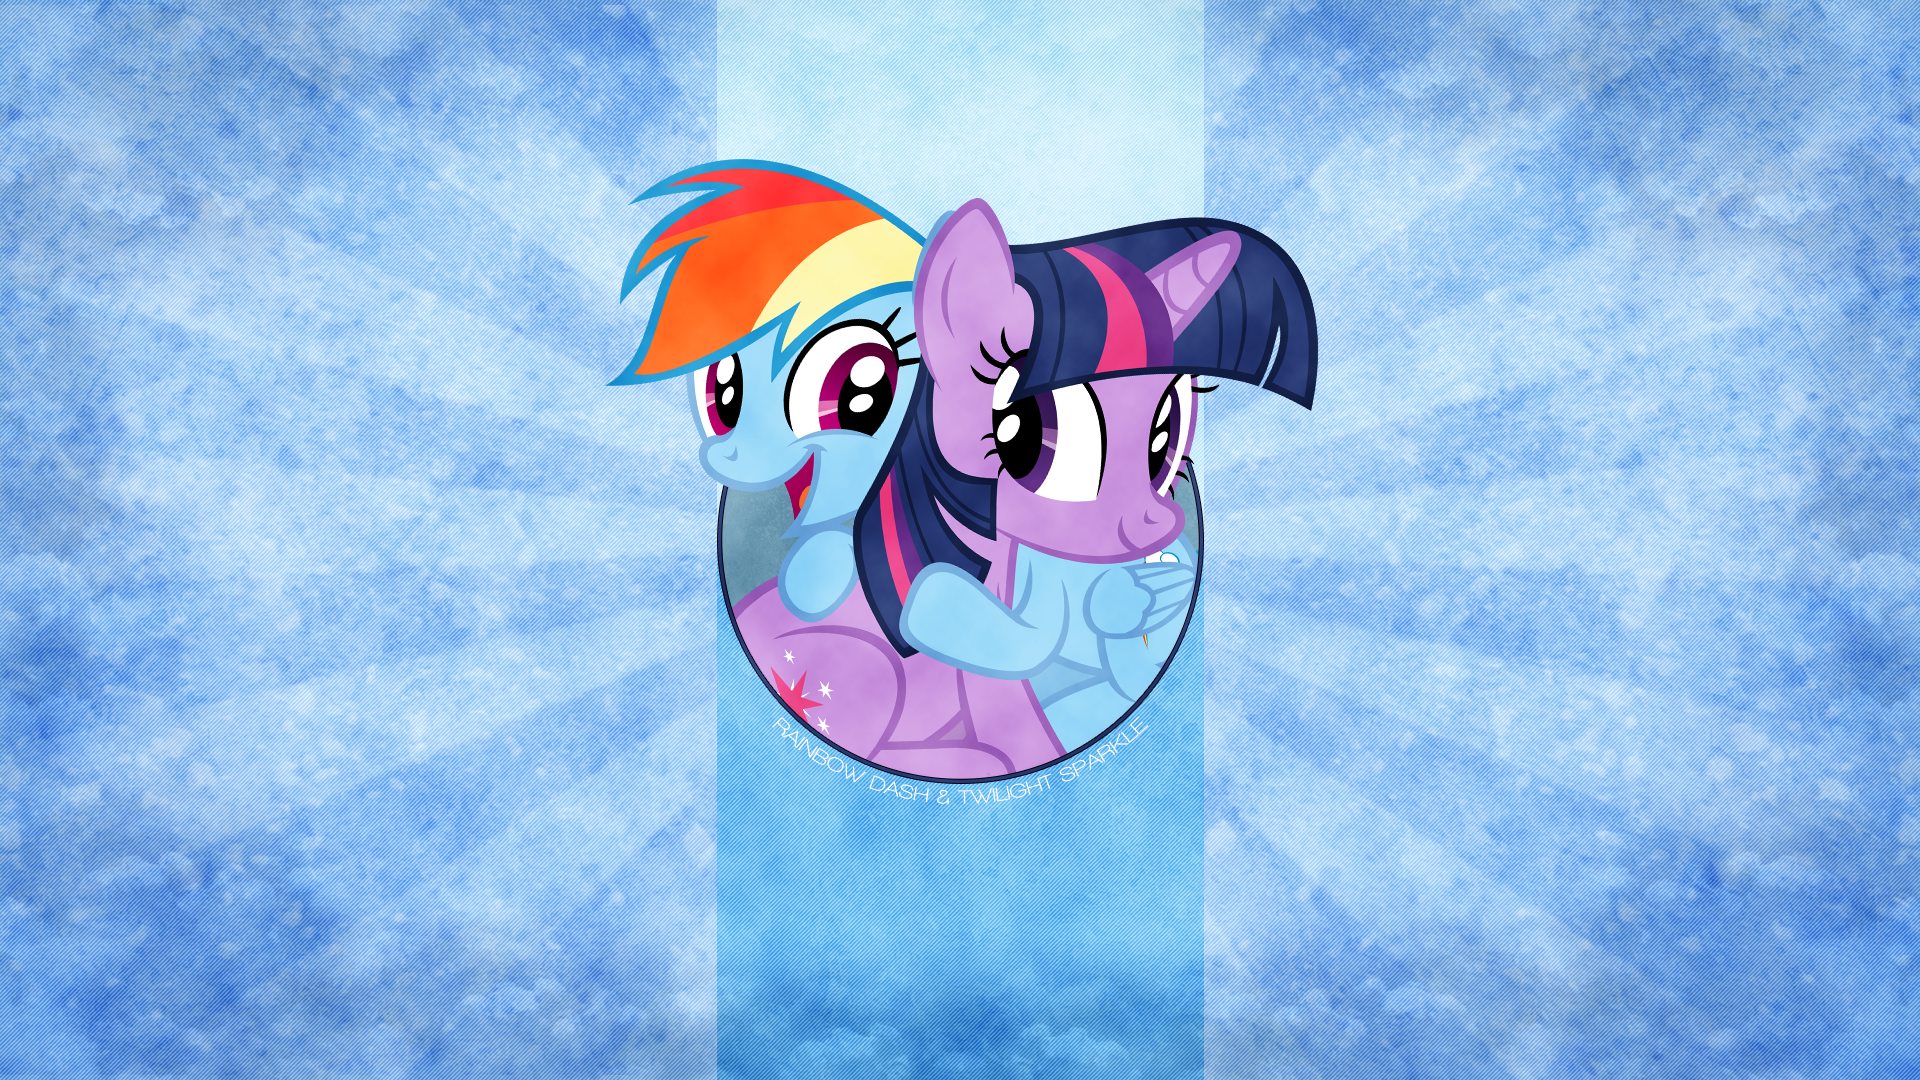 Wallpaper ~ Rainbow and Twilight. by Mackaged and NightmareMoonS